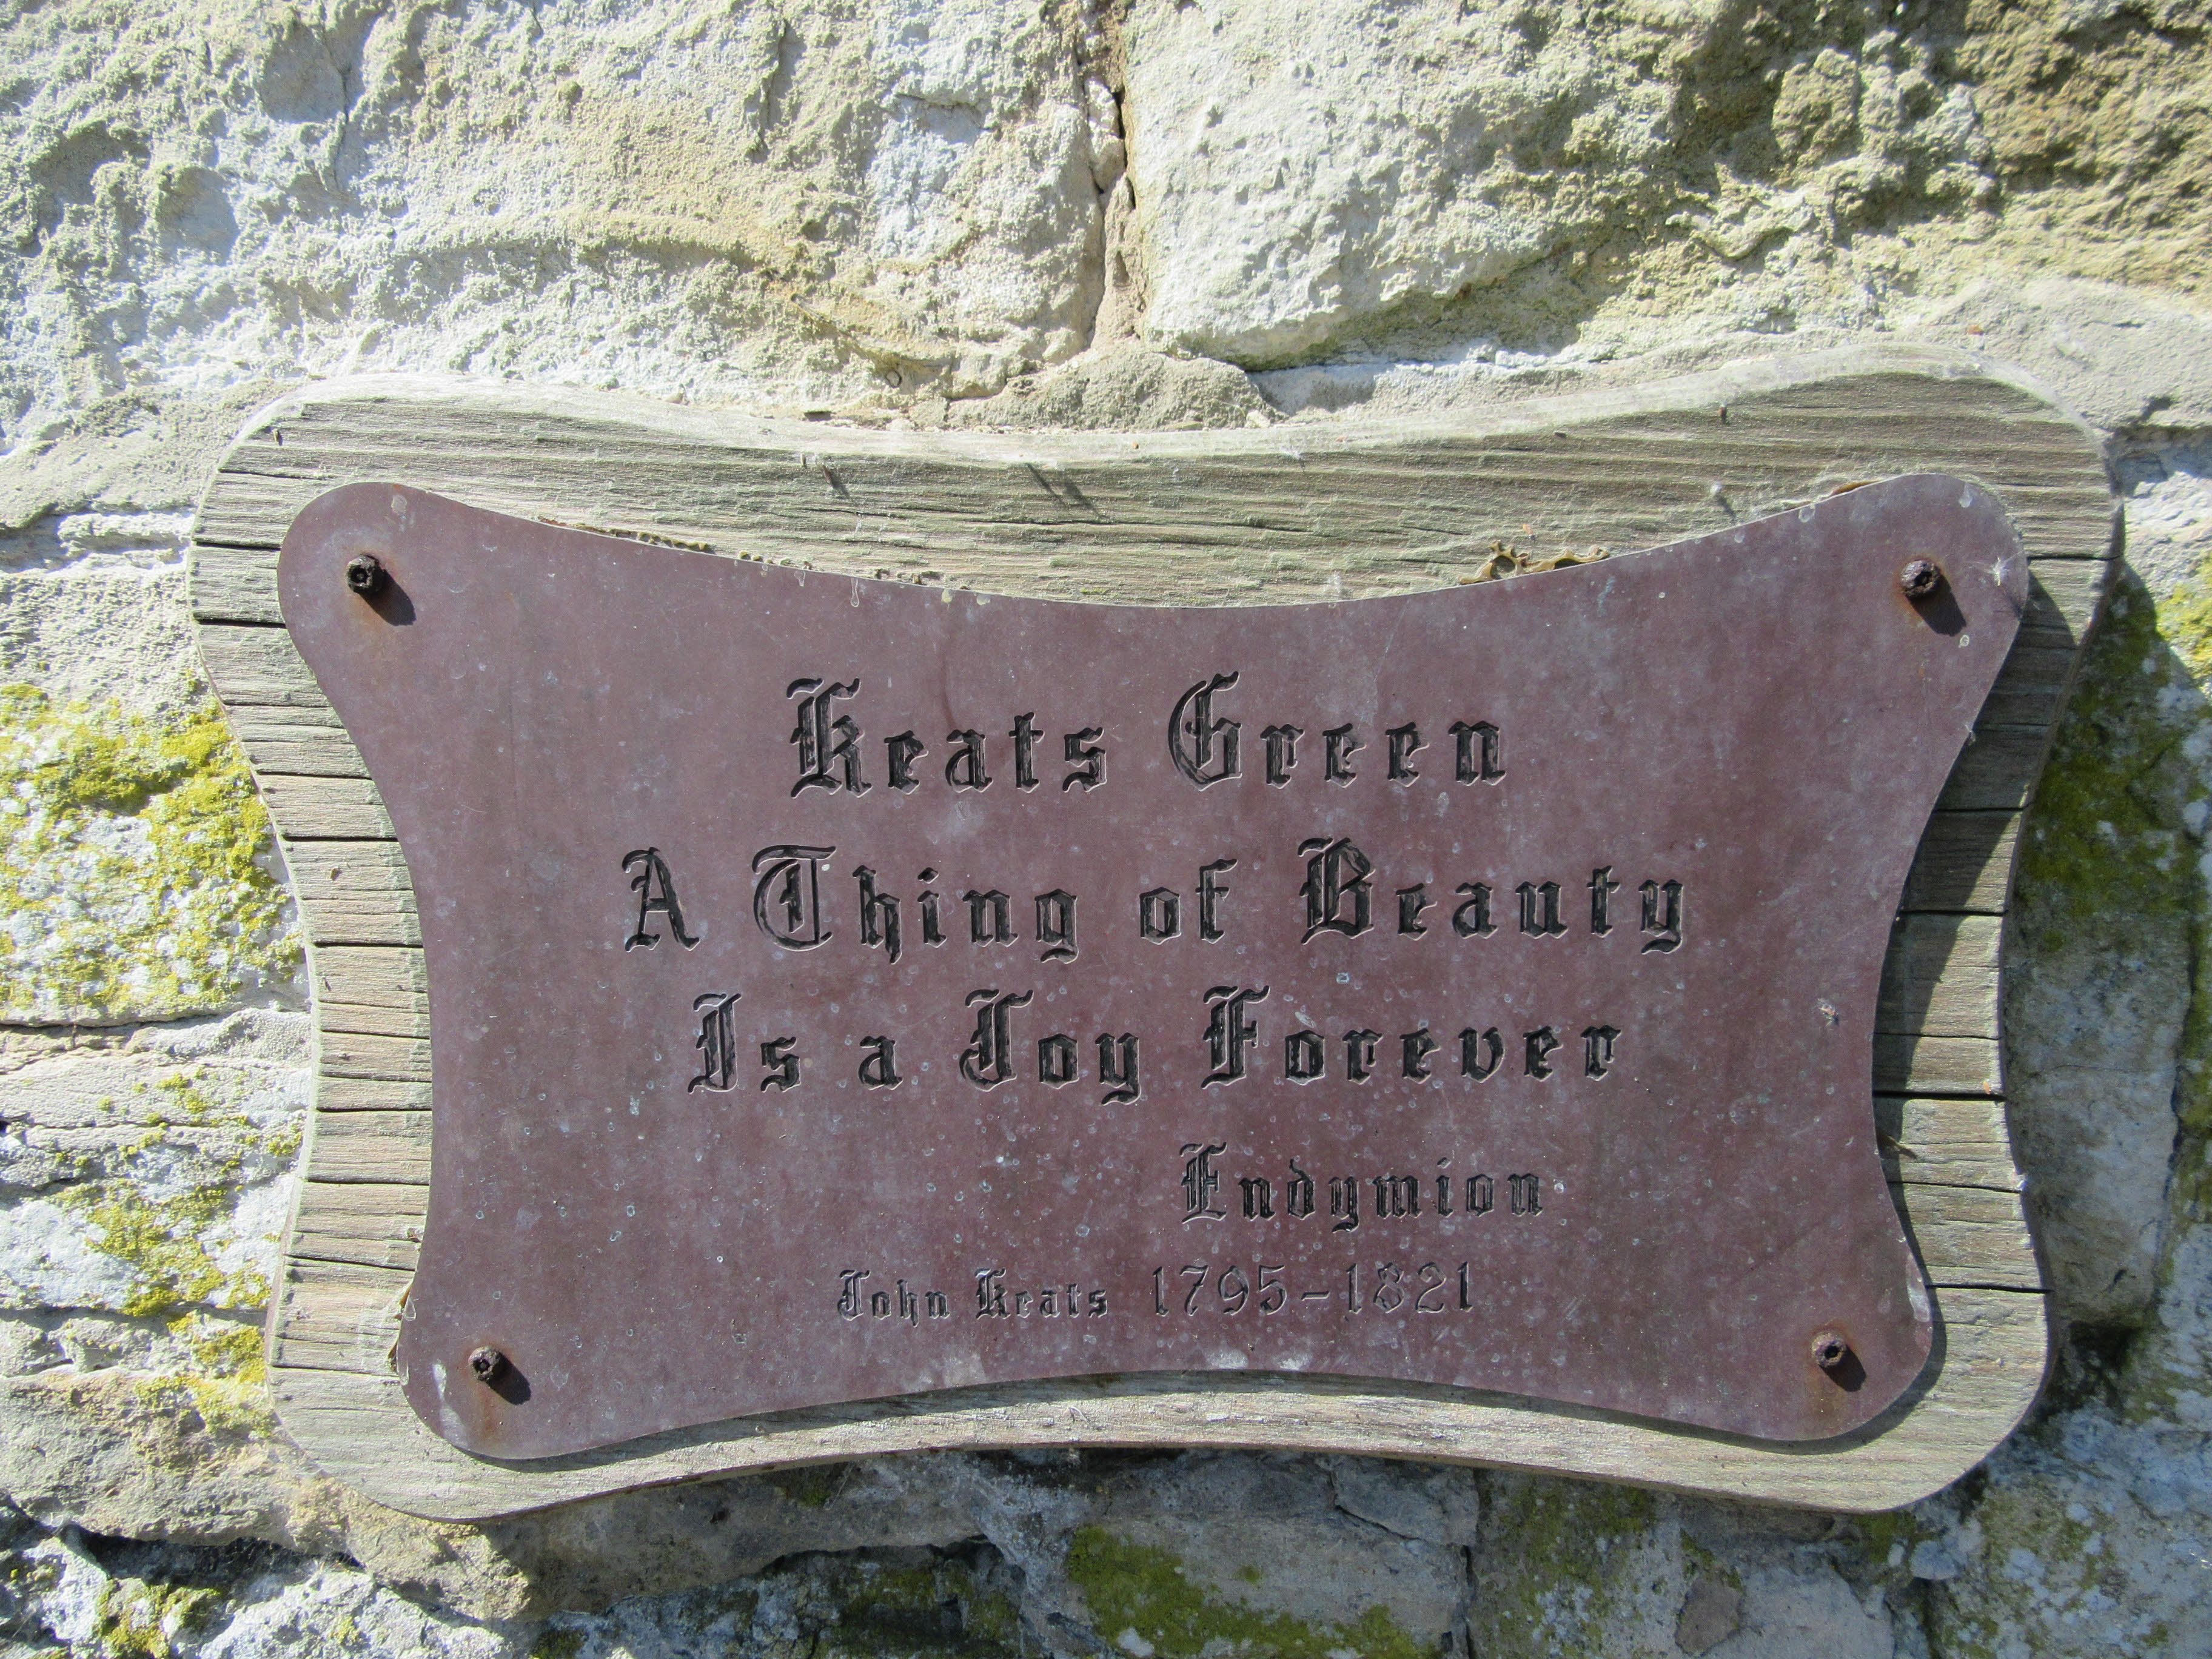 Plaque for Keats Green (south end), Shanklin, placed 1910. My thanks to the
        Shanklin & District Historical Society for this image. Click to enlarge.